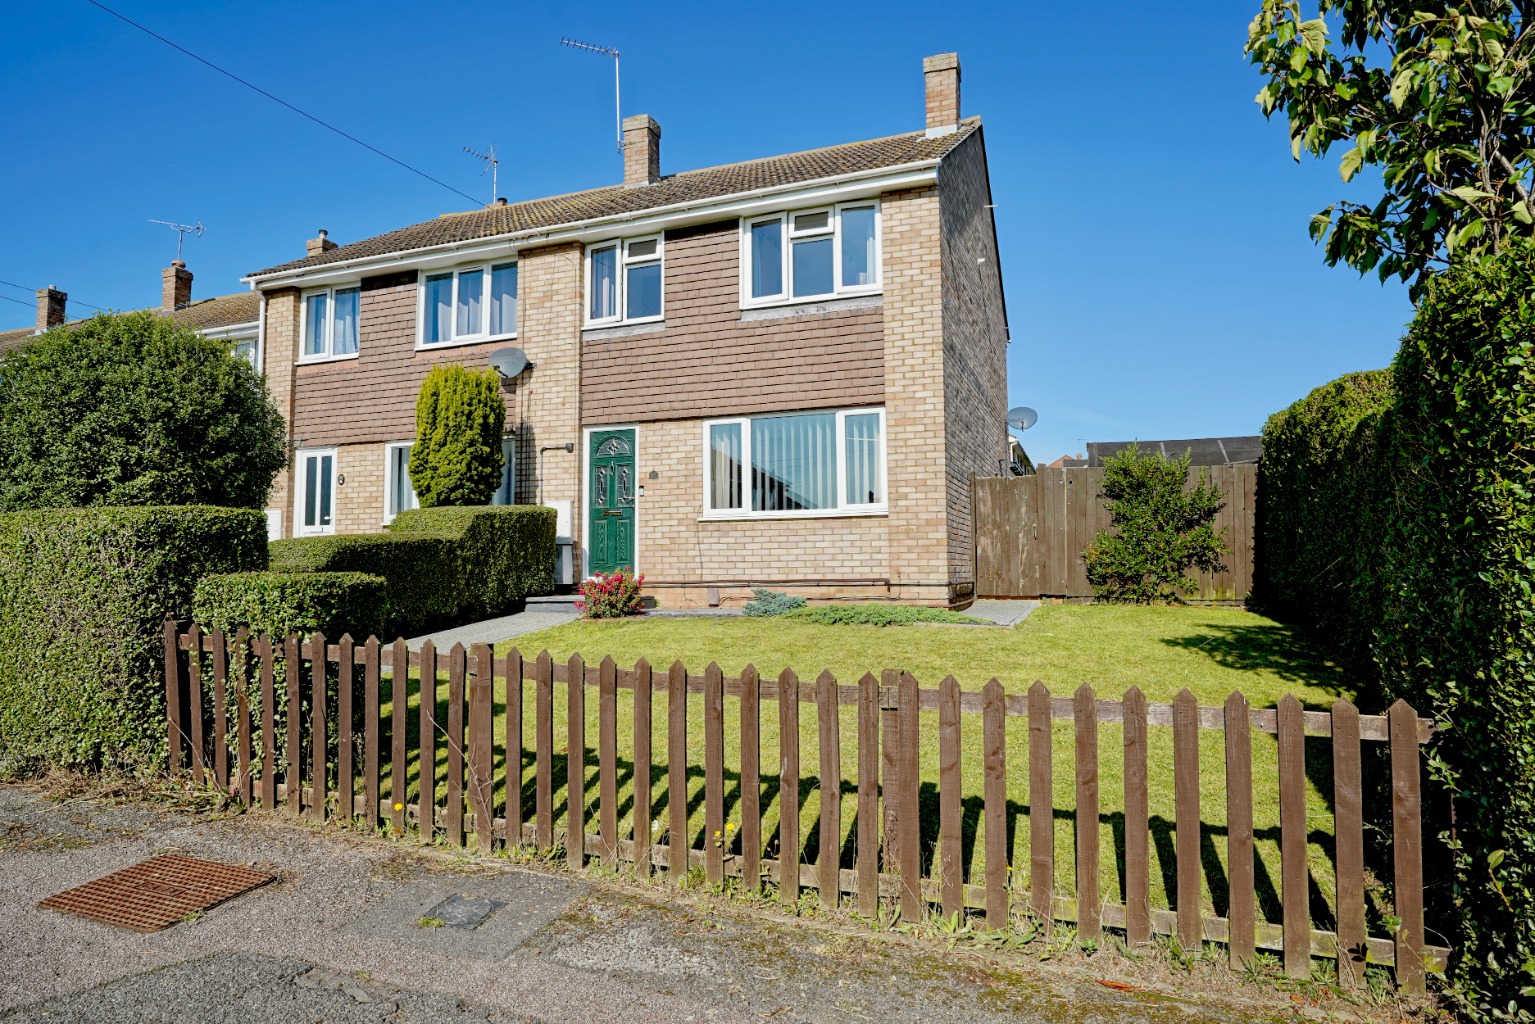 3 bed end of terrace house for sale in Prospero Way, Huntingdon - Property Image 1